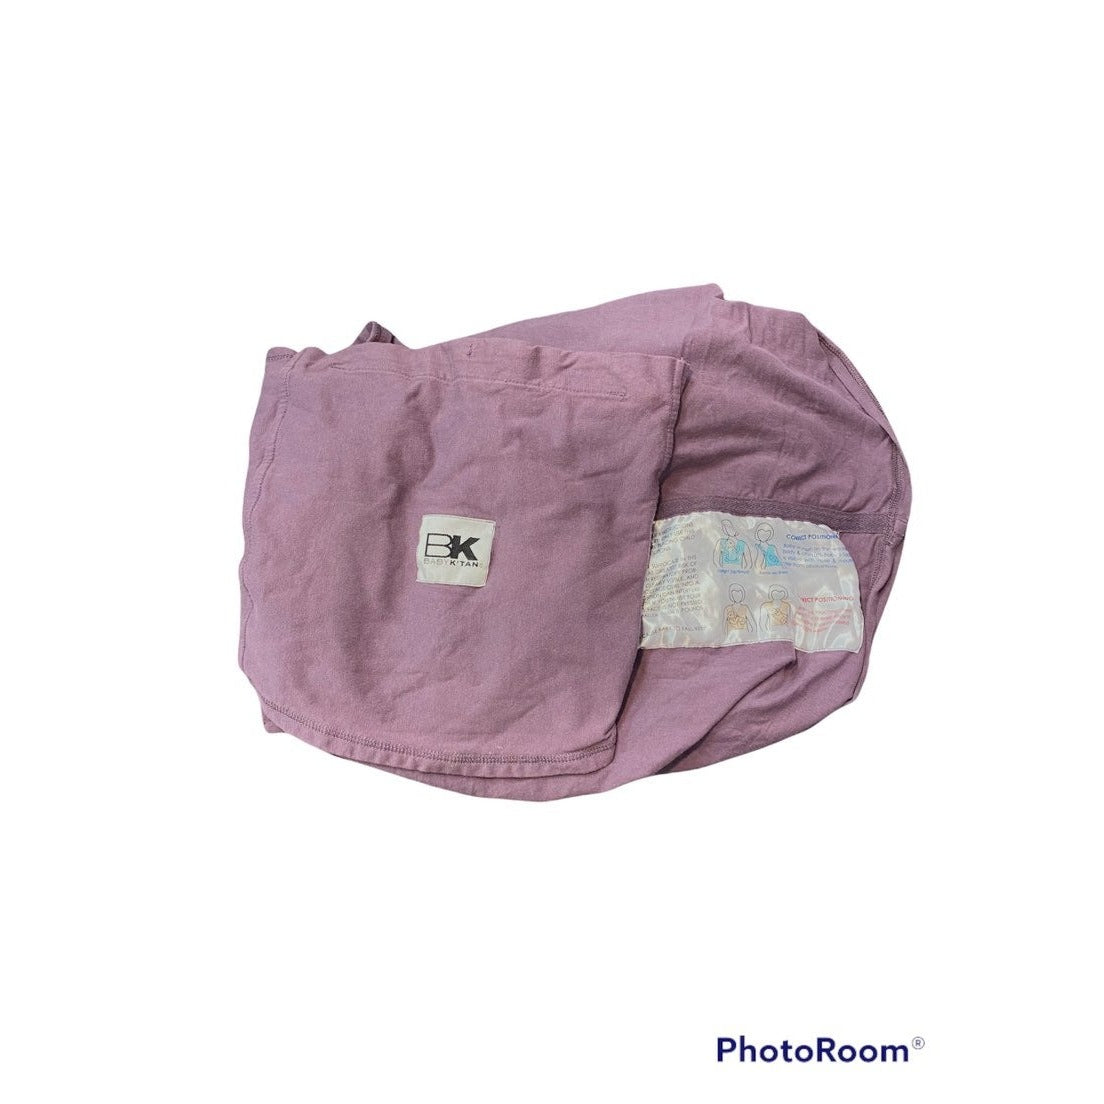 Purple Baby K'tan Carrier Small